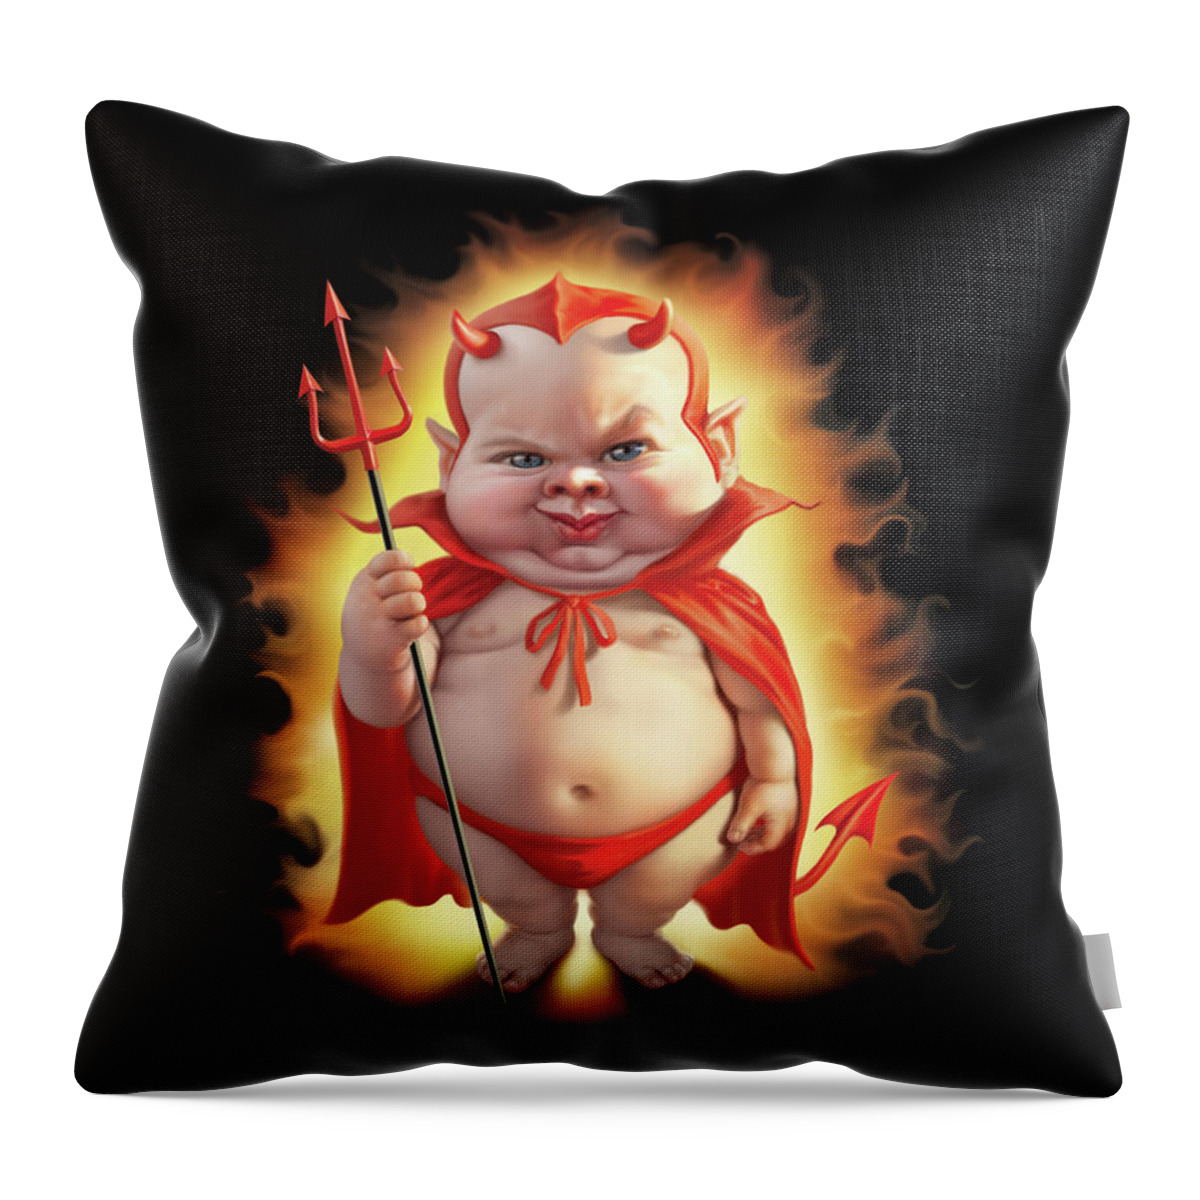 Bad Baby Throw Pillow featuring the digital art Bad Baby by Mark Fredrickson